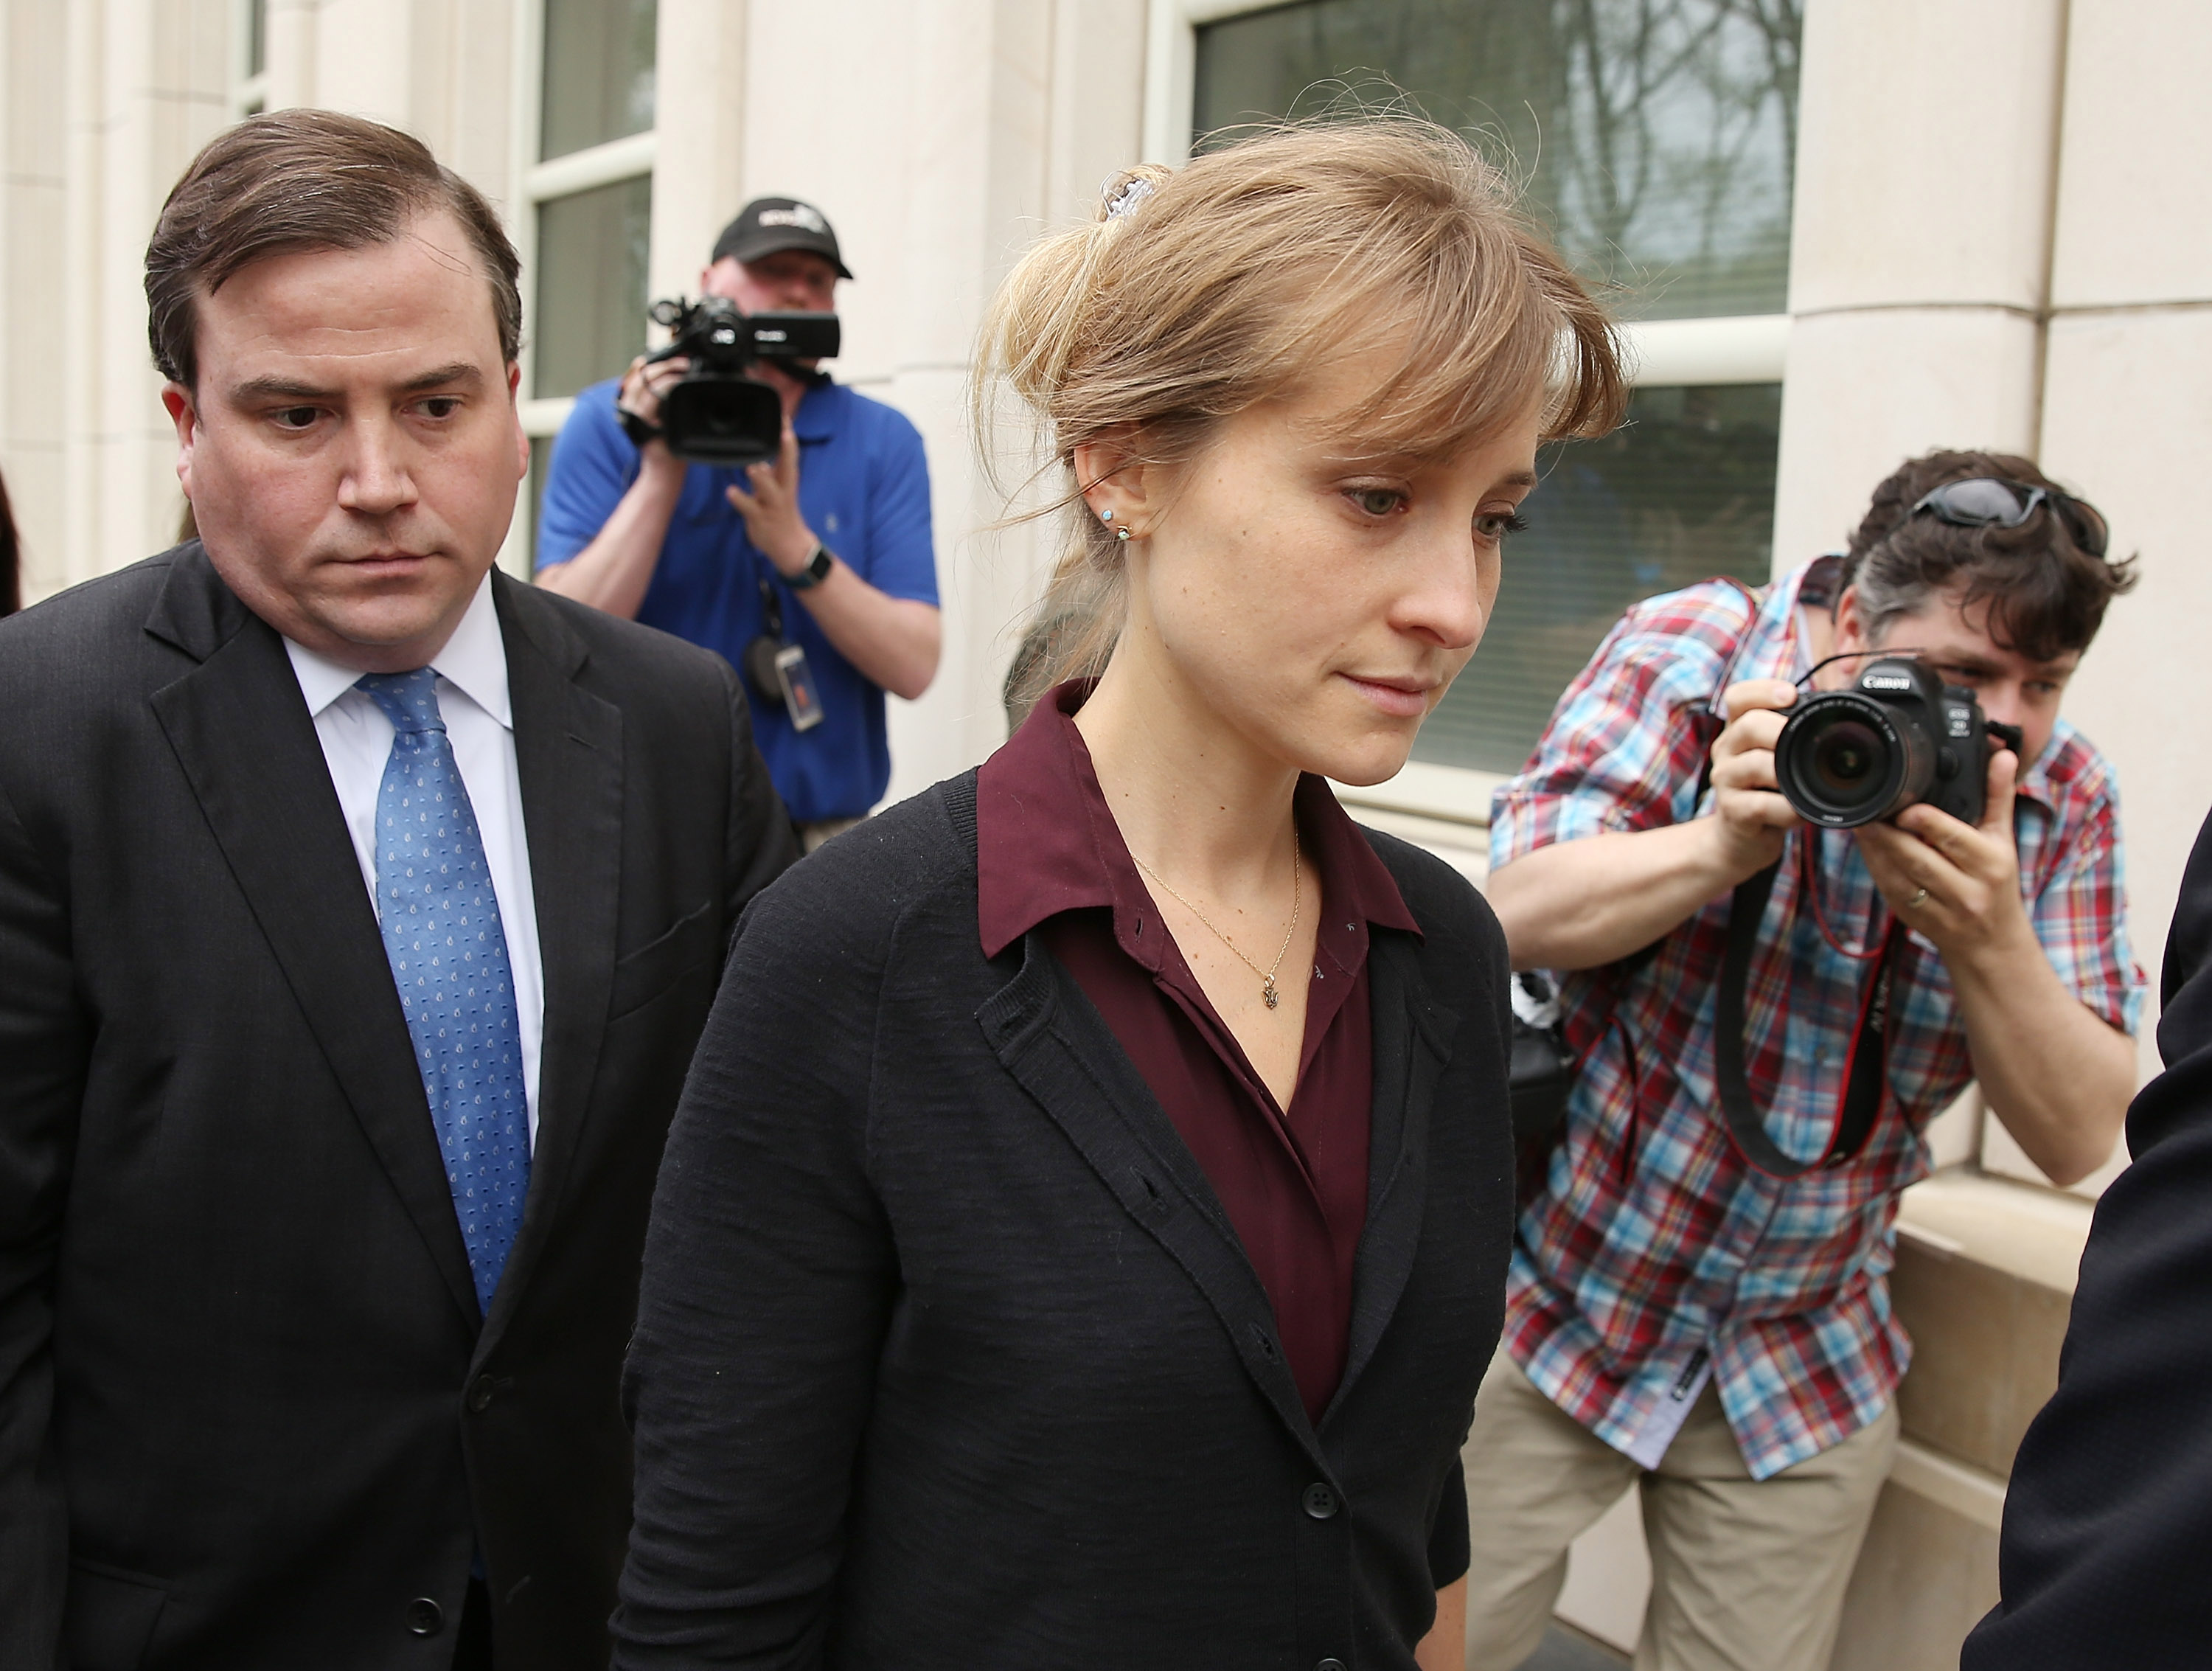 Actress Allison Mack pleaded guilty in April to charges surrounding her involvement in the sex cult